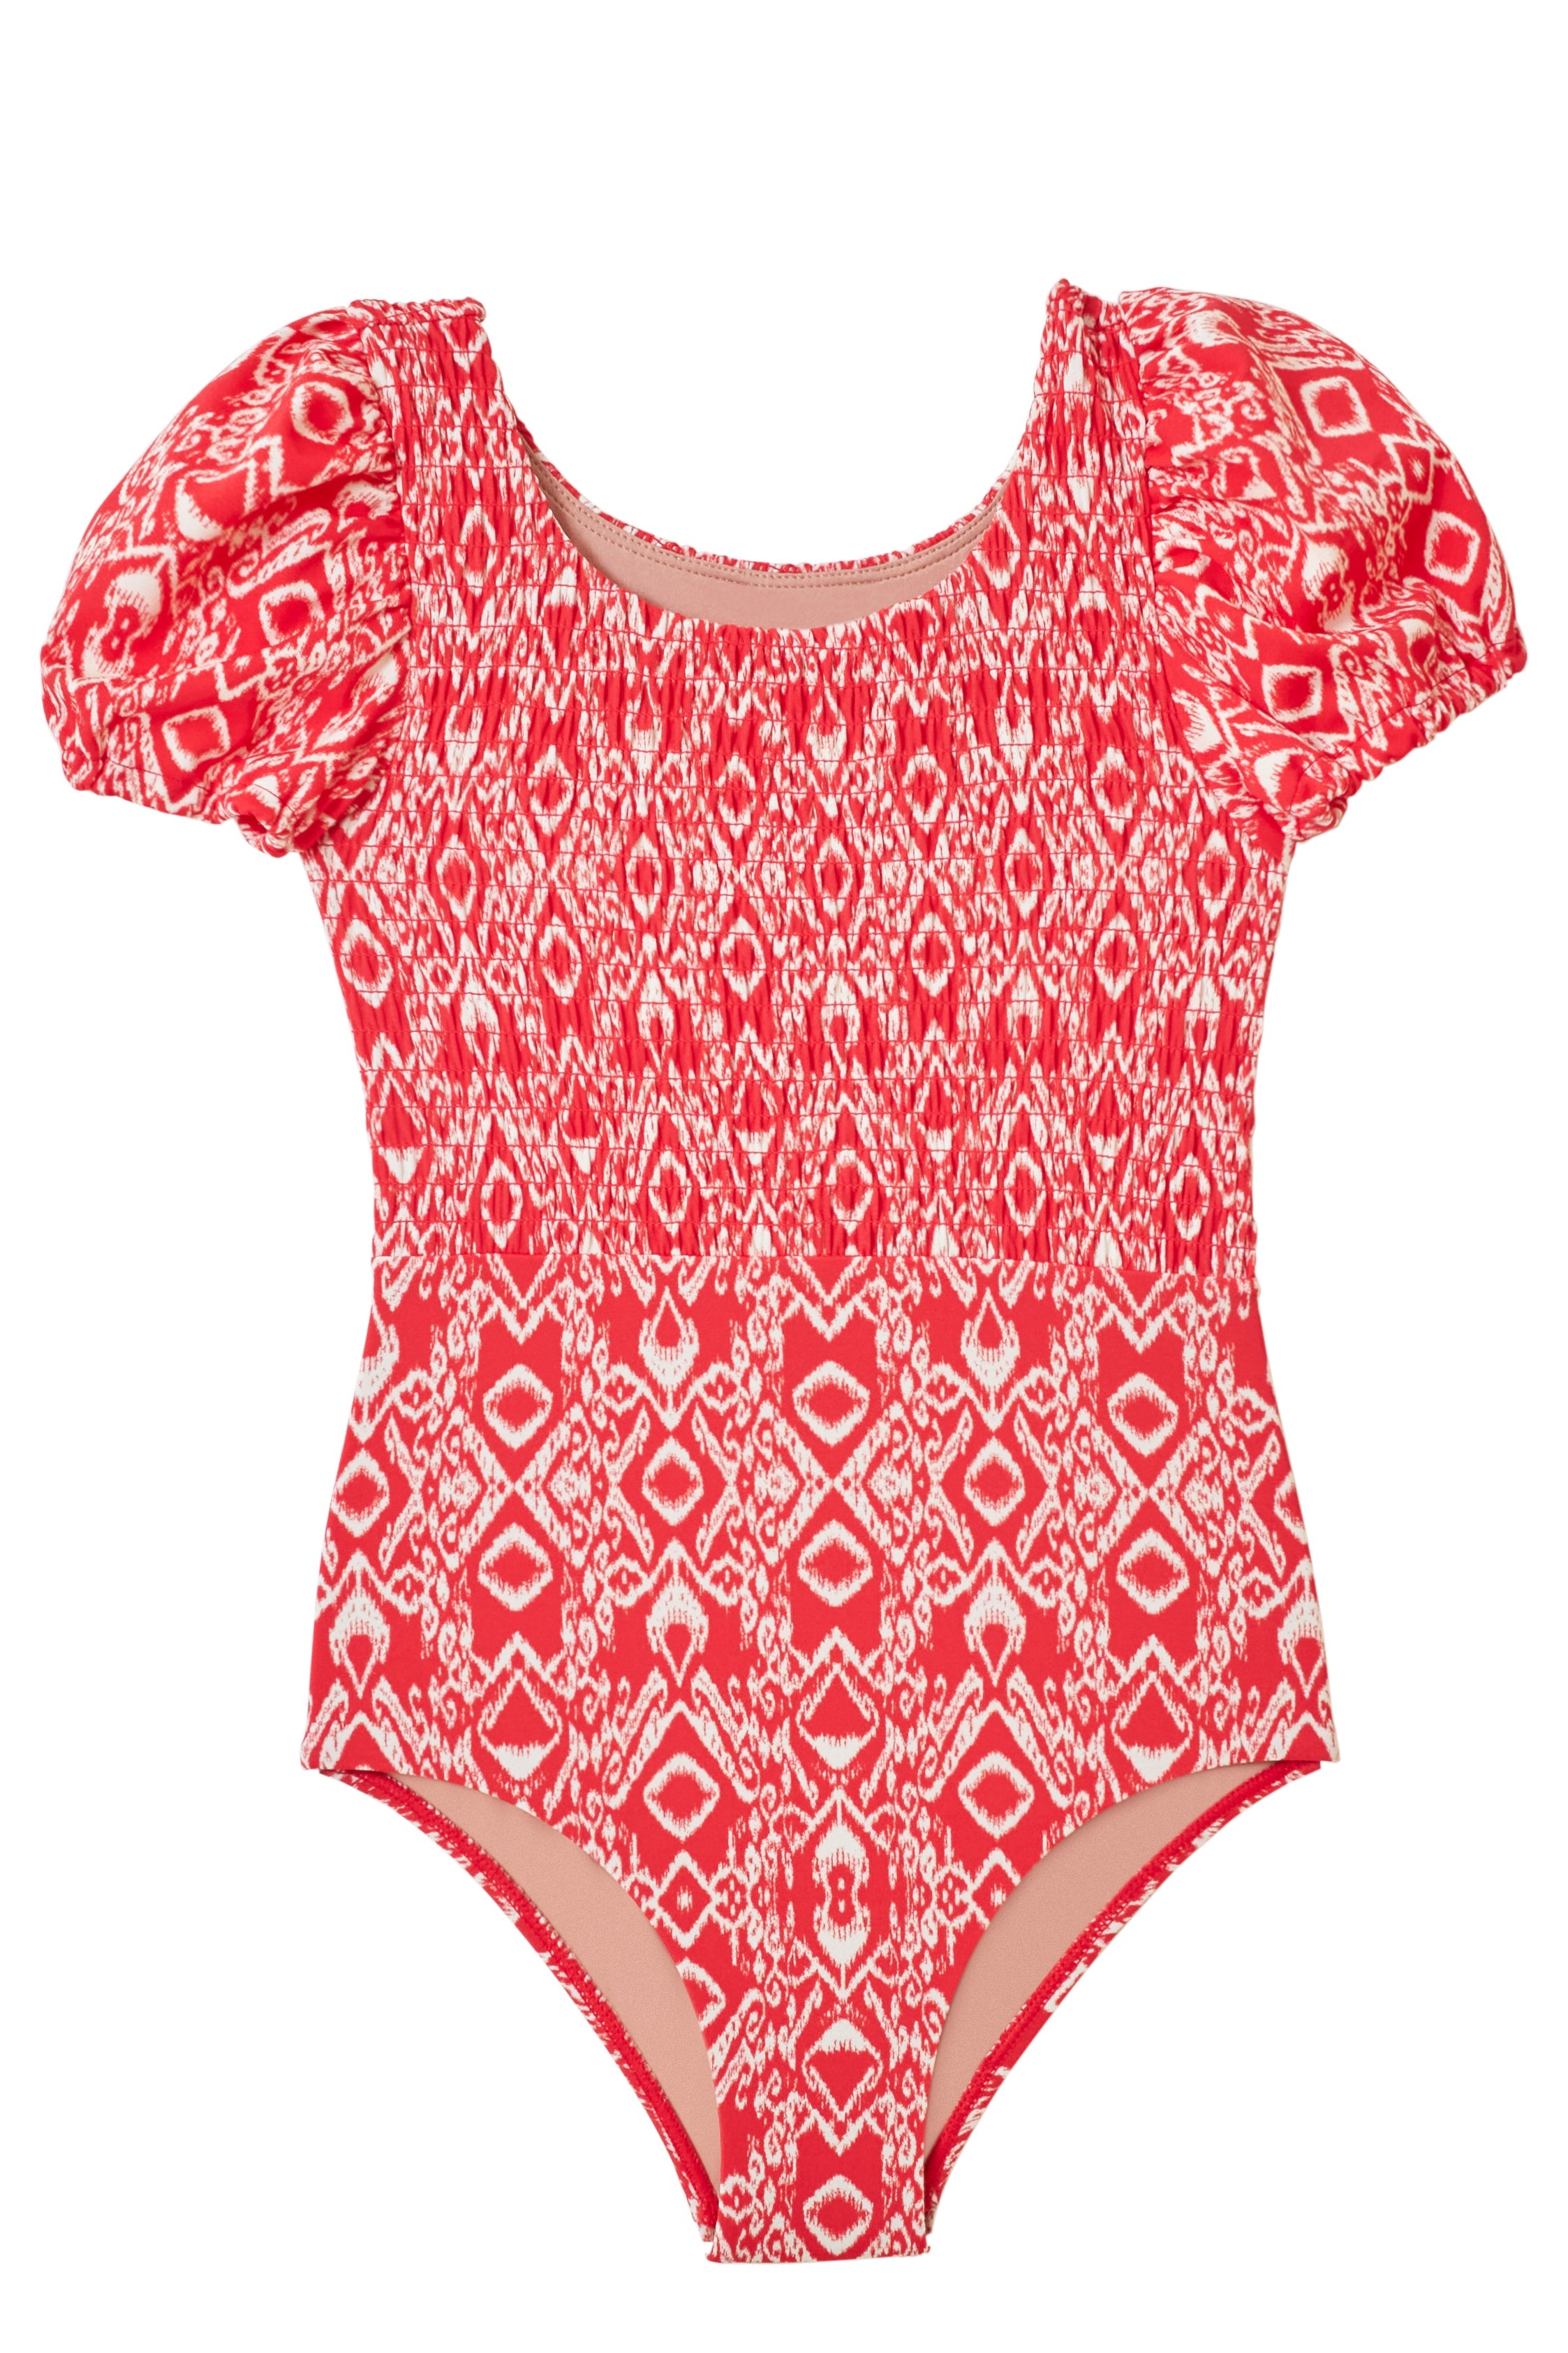 Little Delilah One-Piece Swimsuit by Hermoza